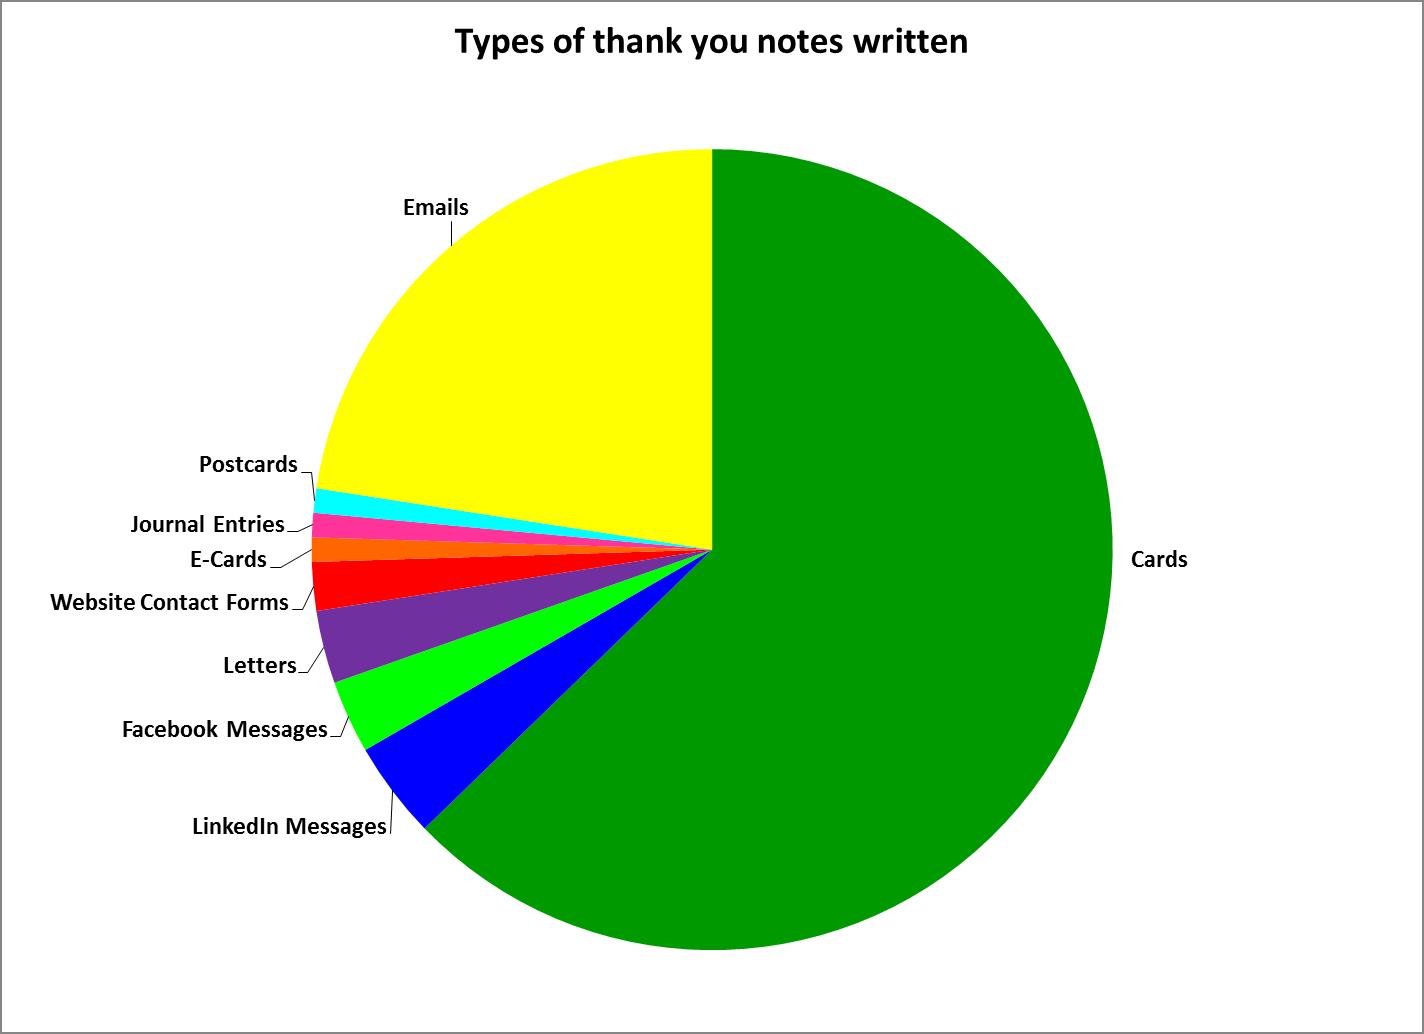 Types of thank you notes written